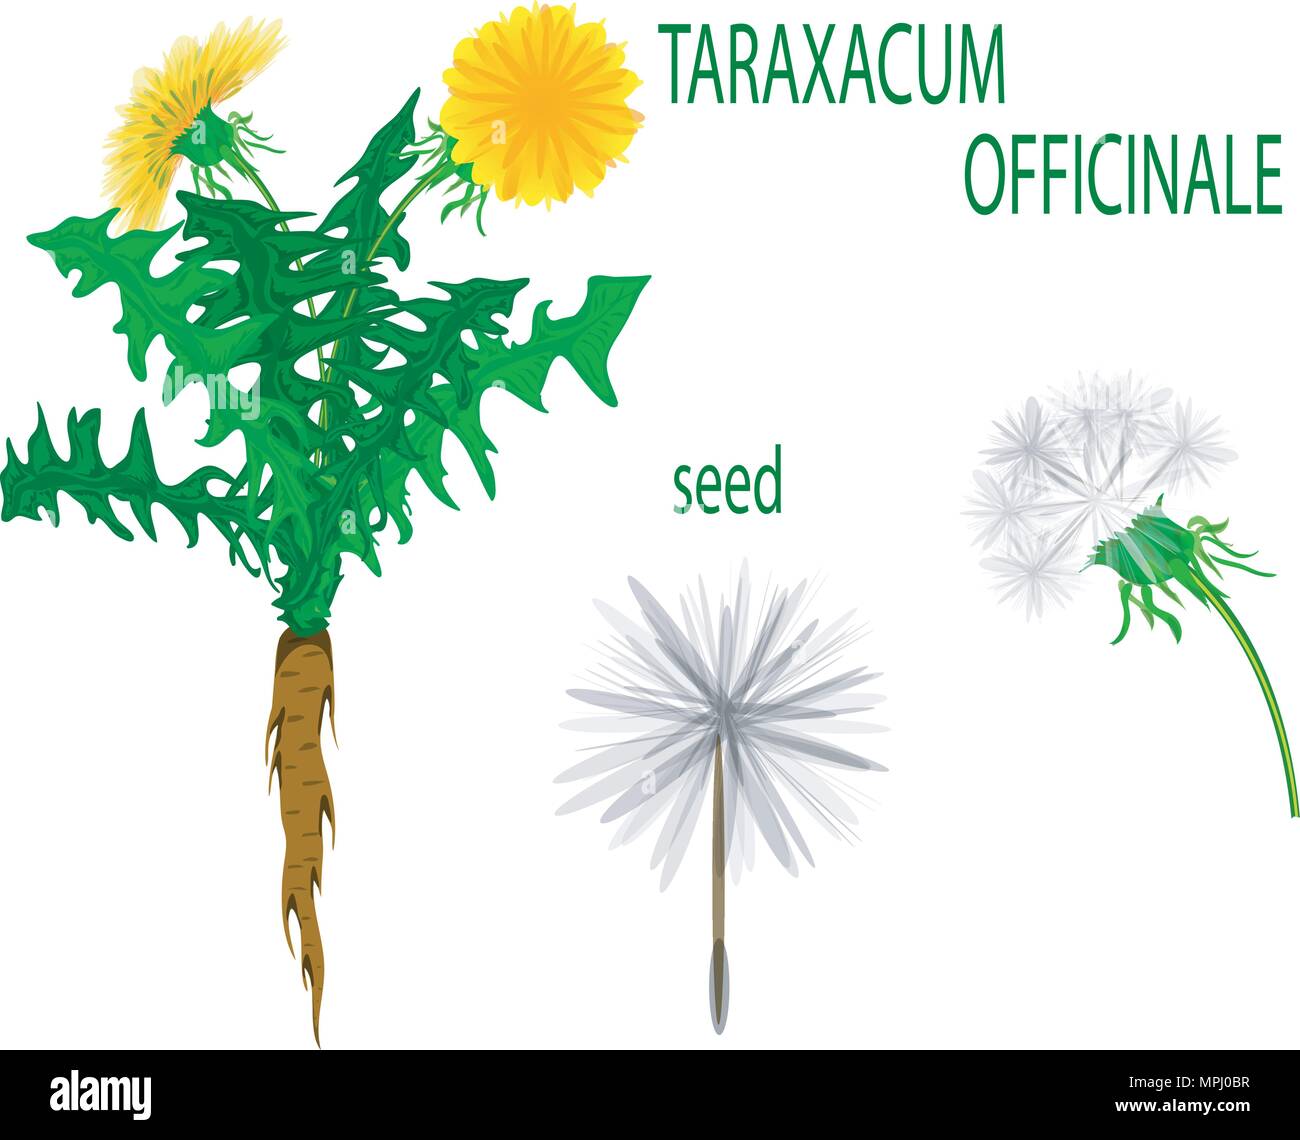 illustration of a dandelion, seed and root. Taraxacum Officinale. Stock Vector